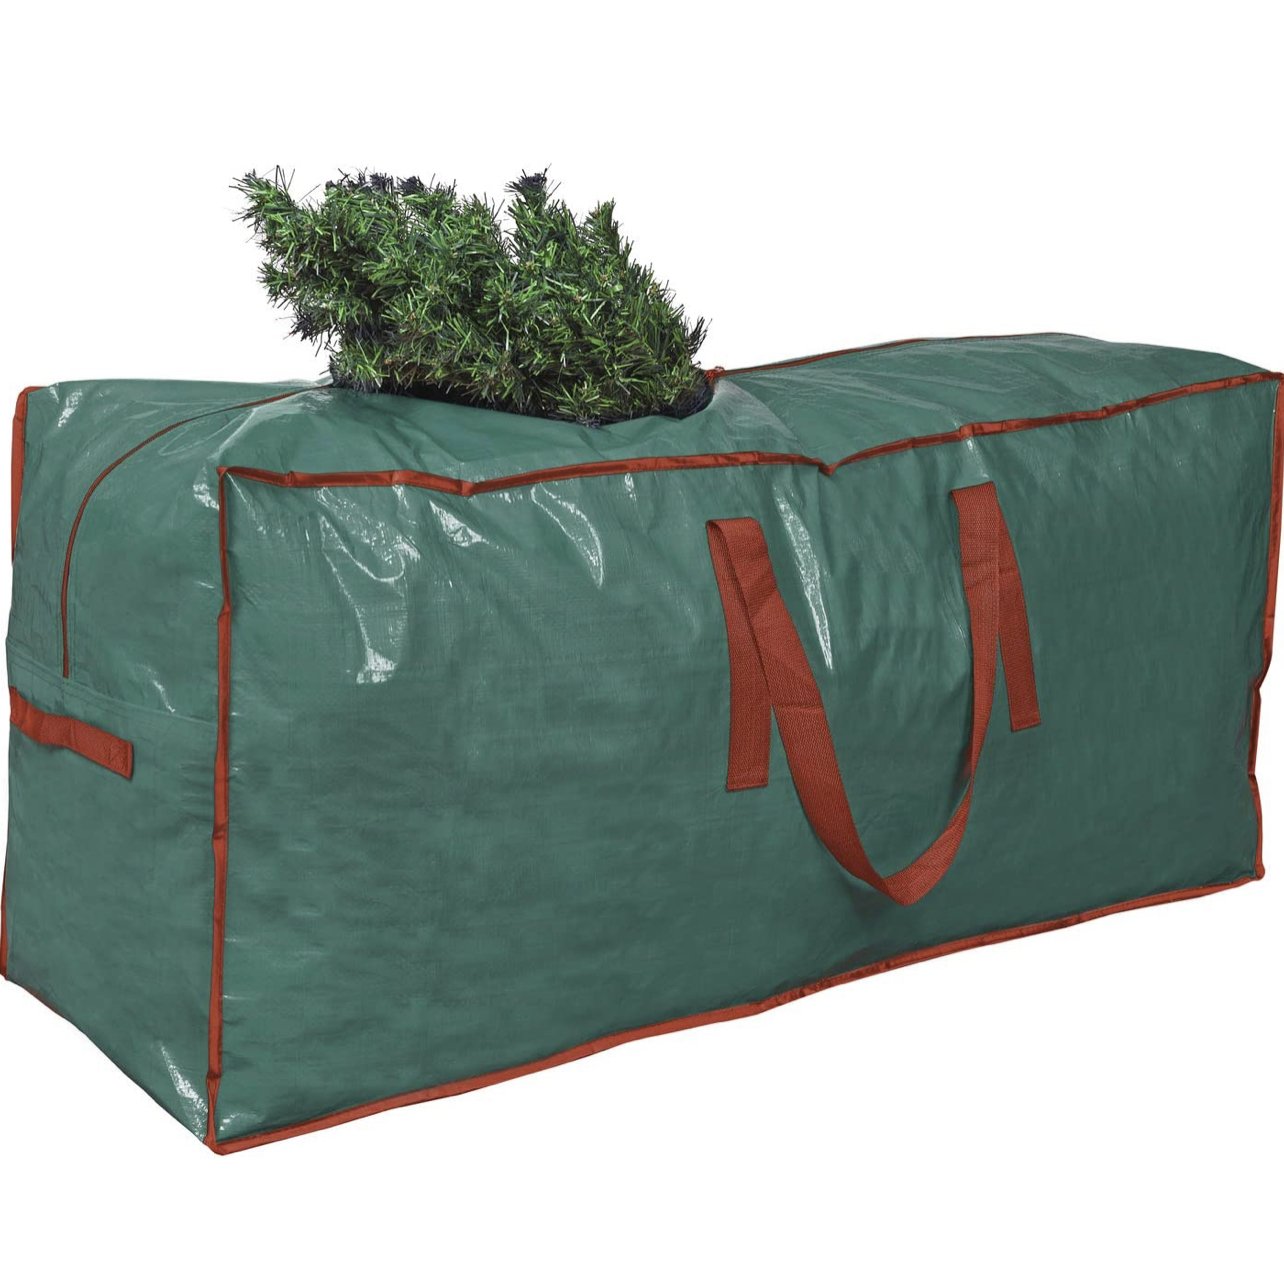  These bags are awesome for greenery/garlands, wreaths, lights, and smaller trees, as well as larger decor pieces that will take up an entire tub!&nbsp; I love how much you can fit in here and the handles make it easy to move around! 